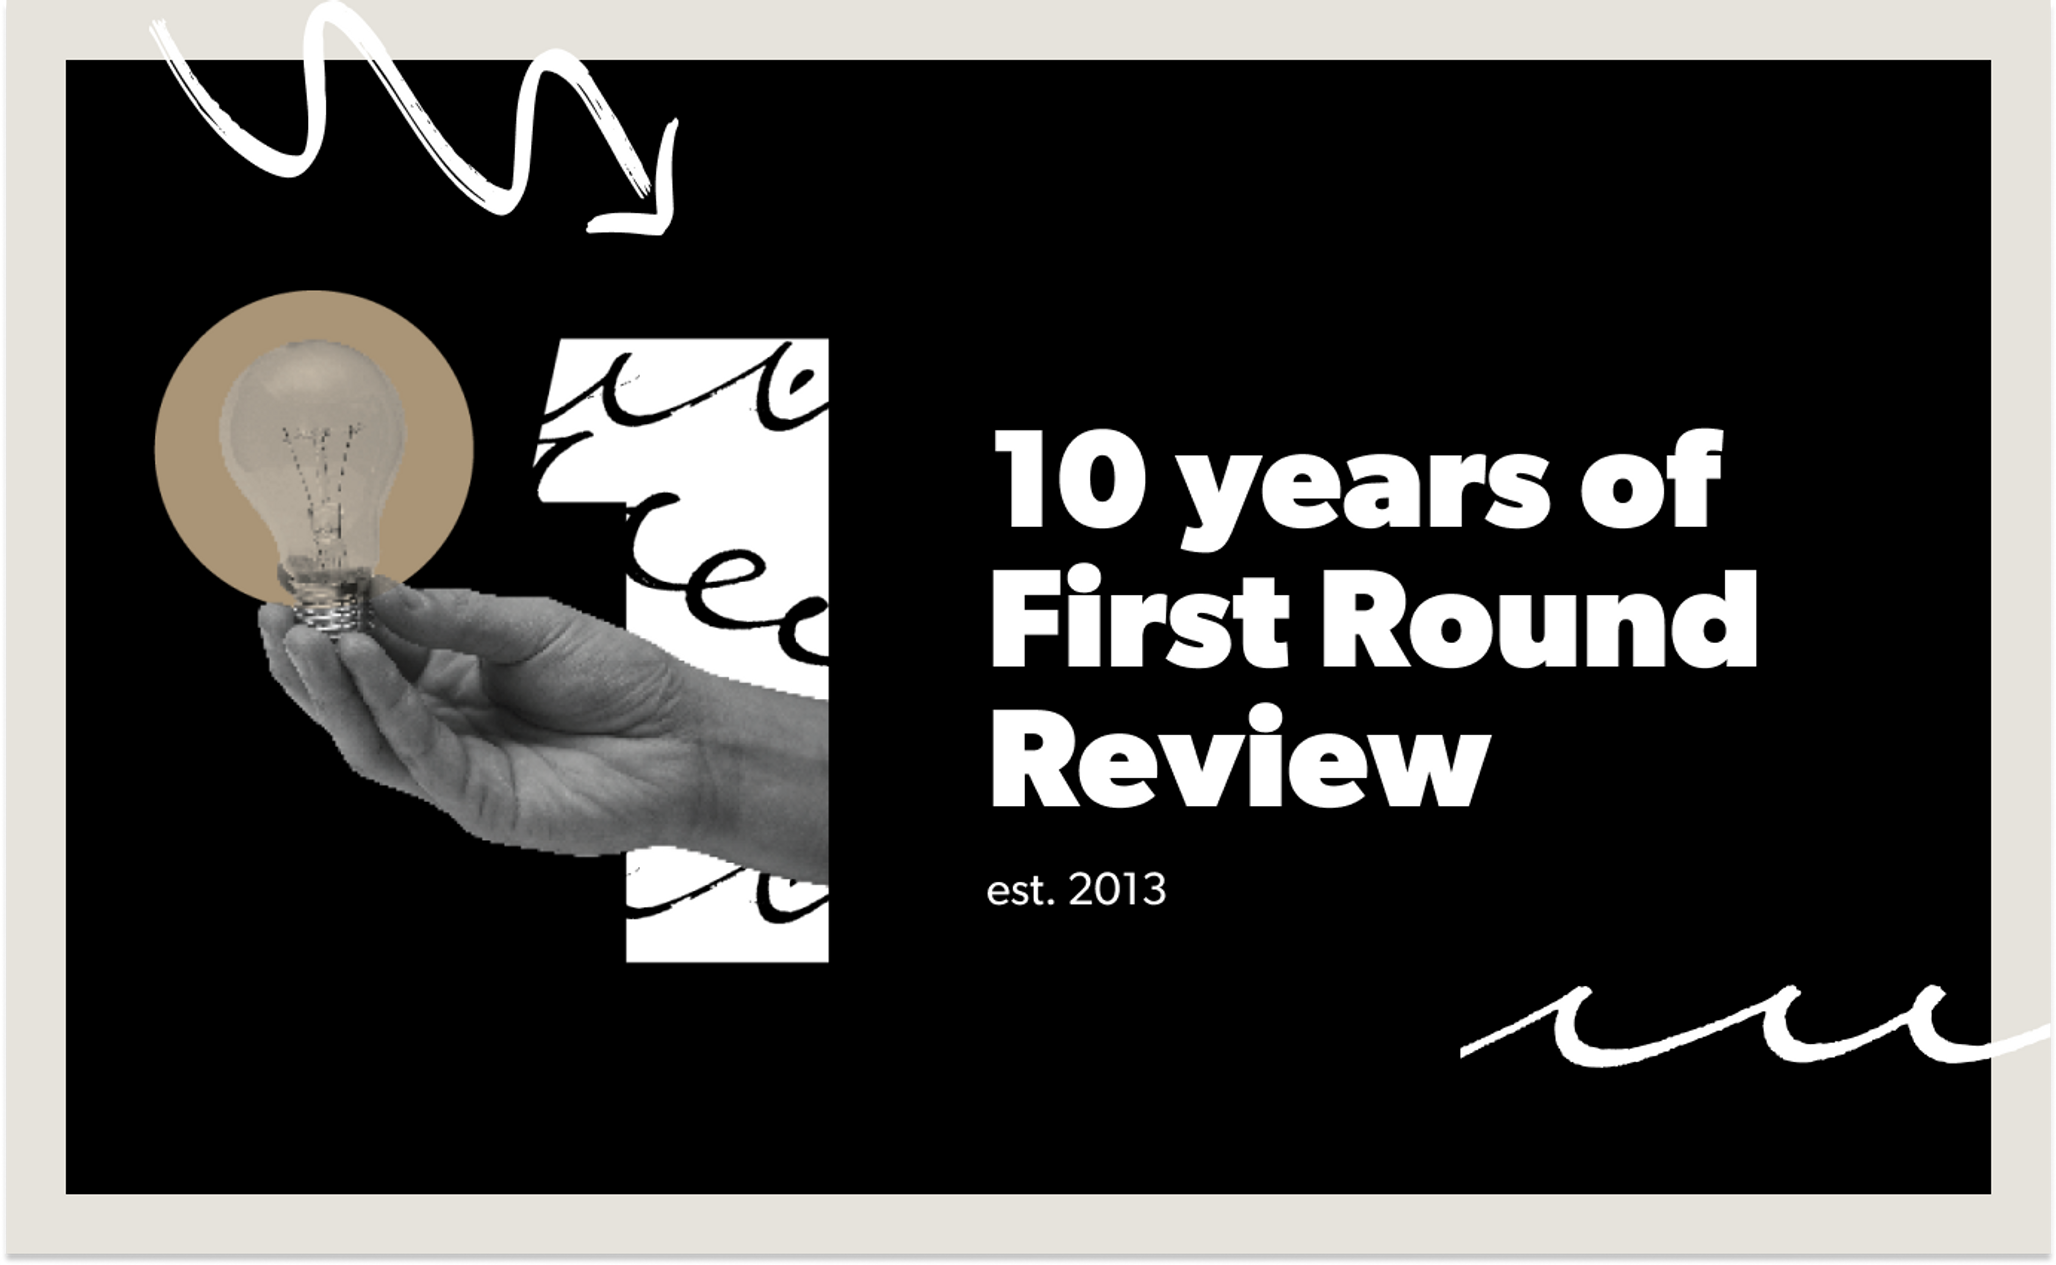 The 100 Best Bits of Advice from 10 Years of First Round Review